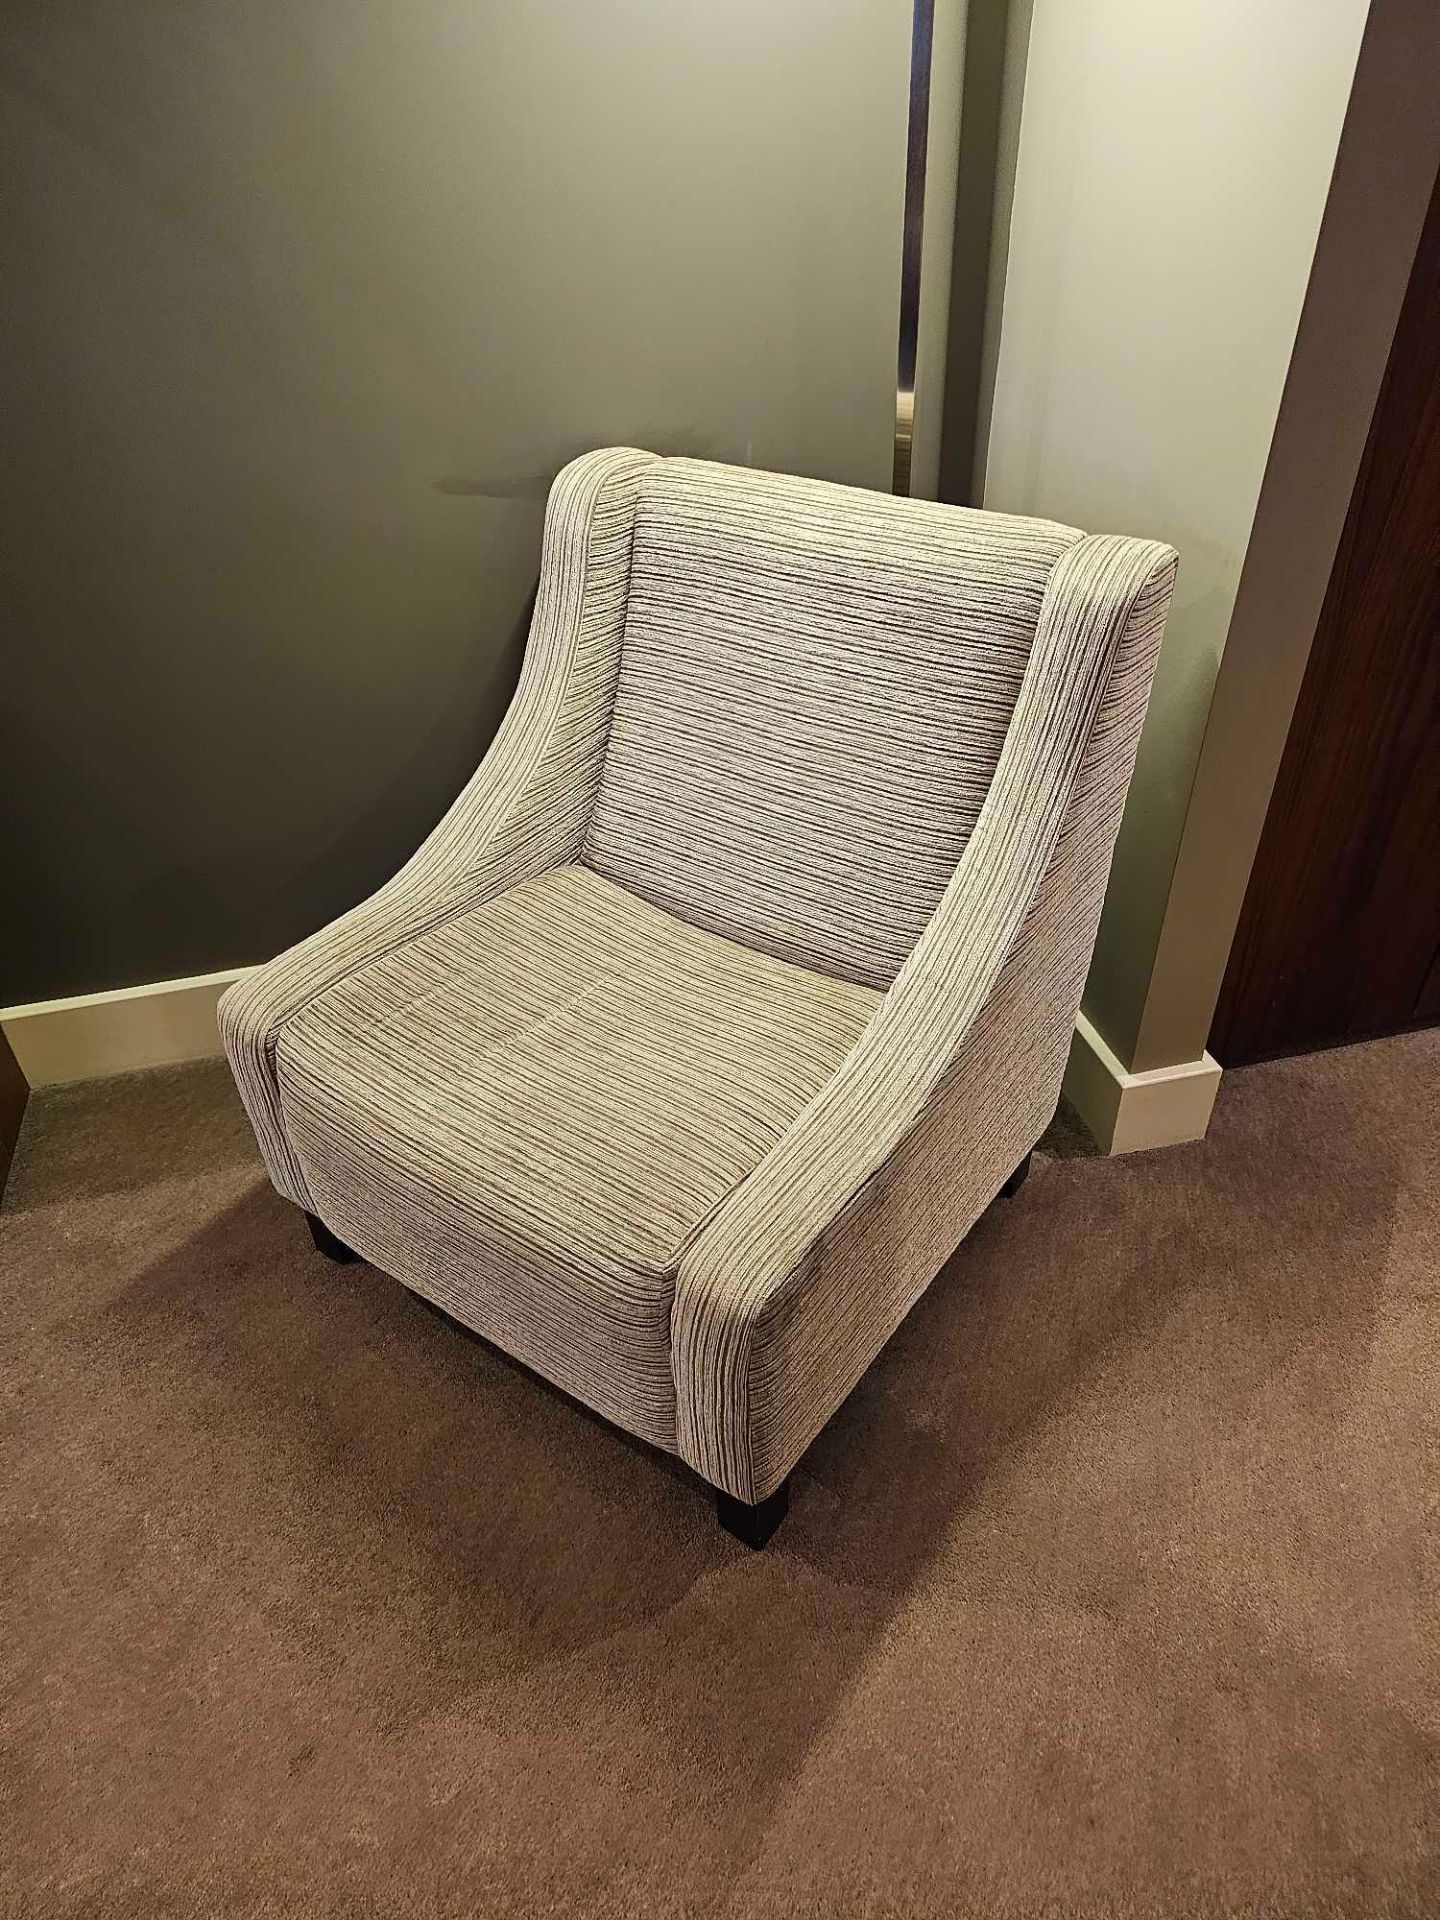 An upholstered relaxer chair 78 x 54 x 86cm ( Location : 210)